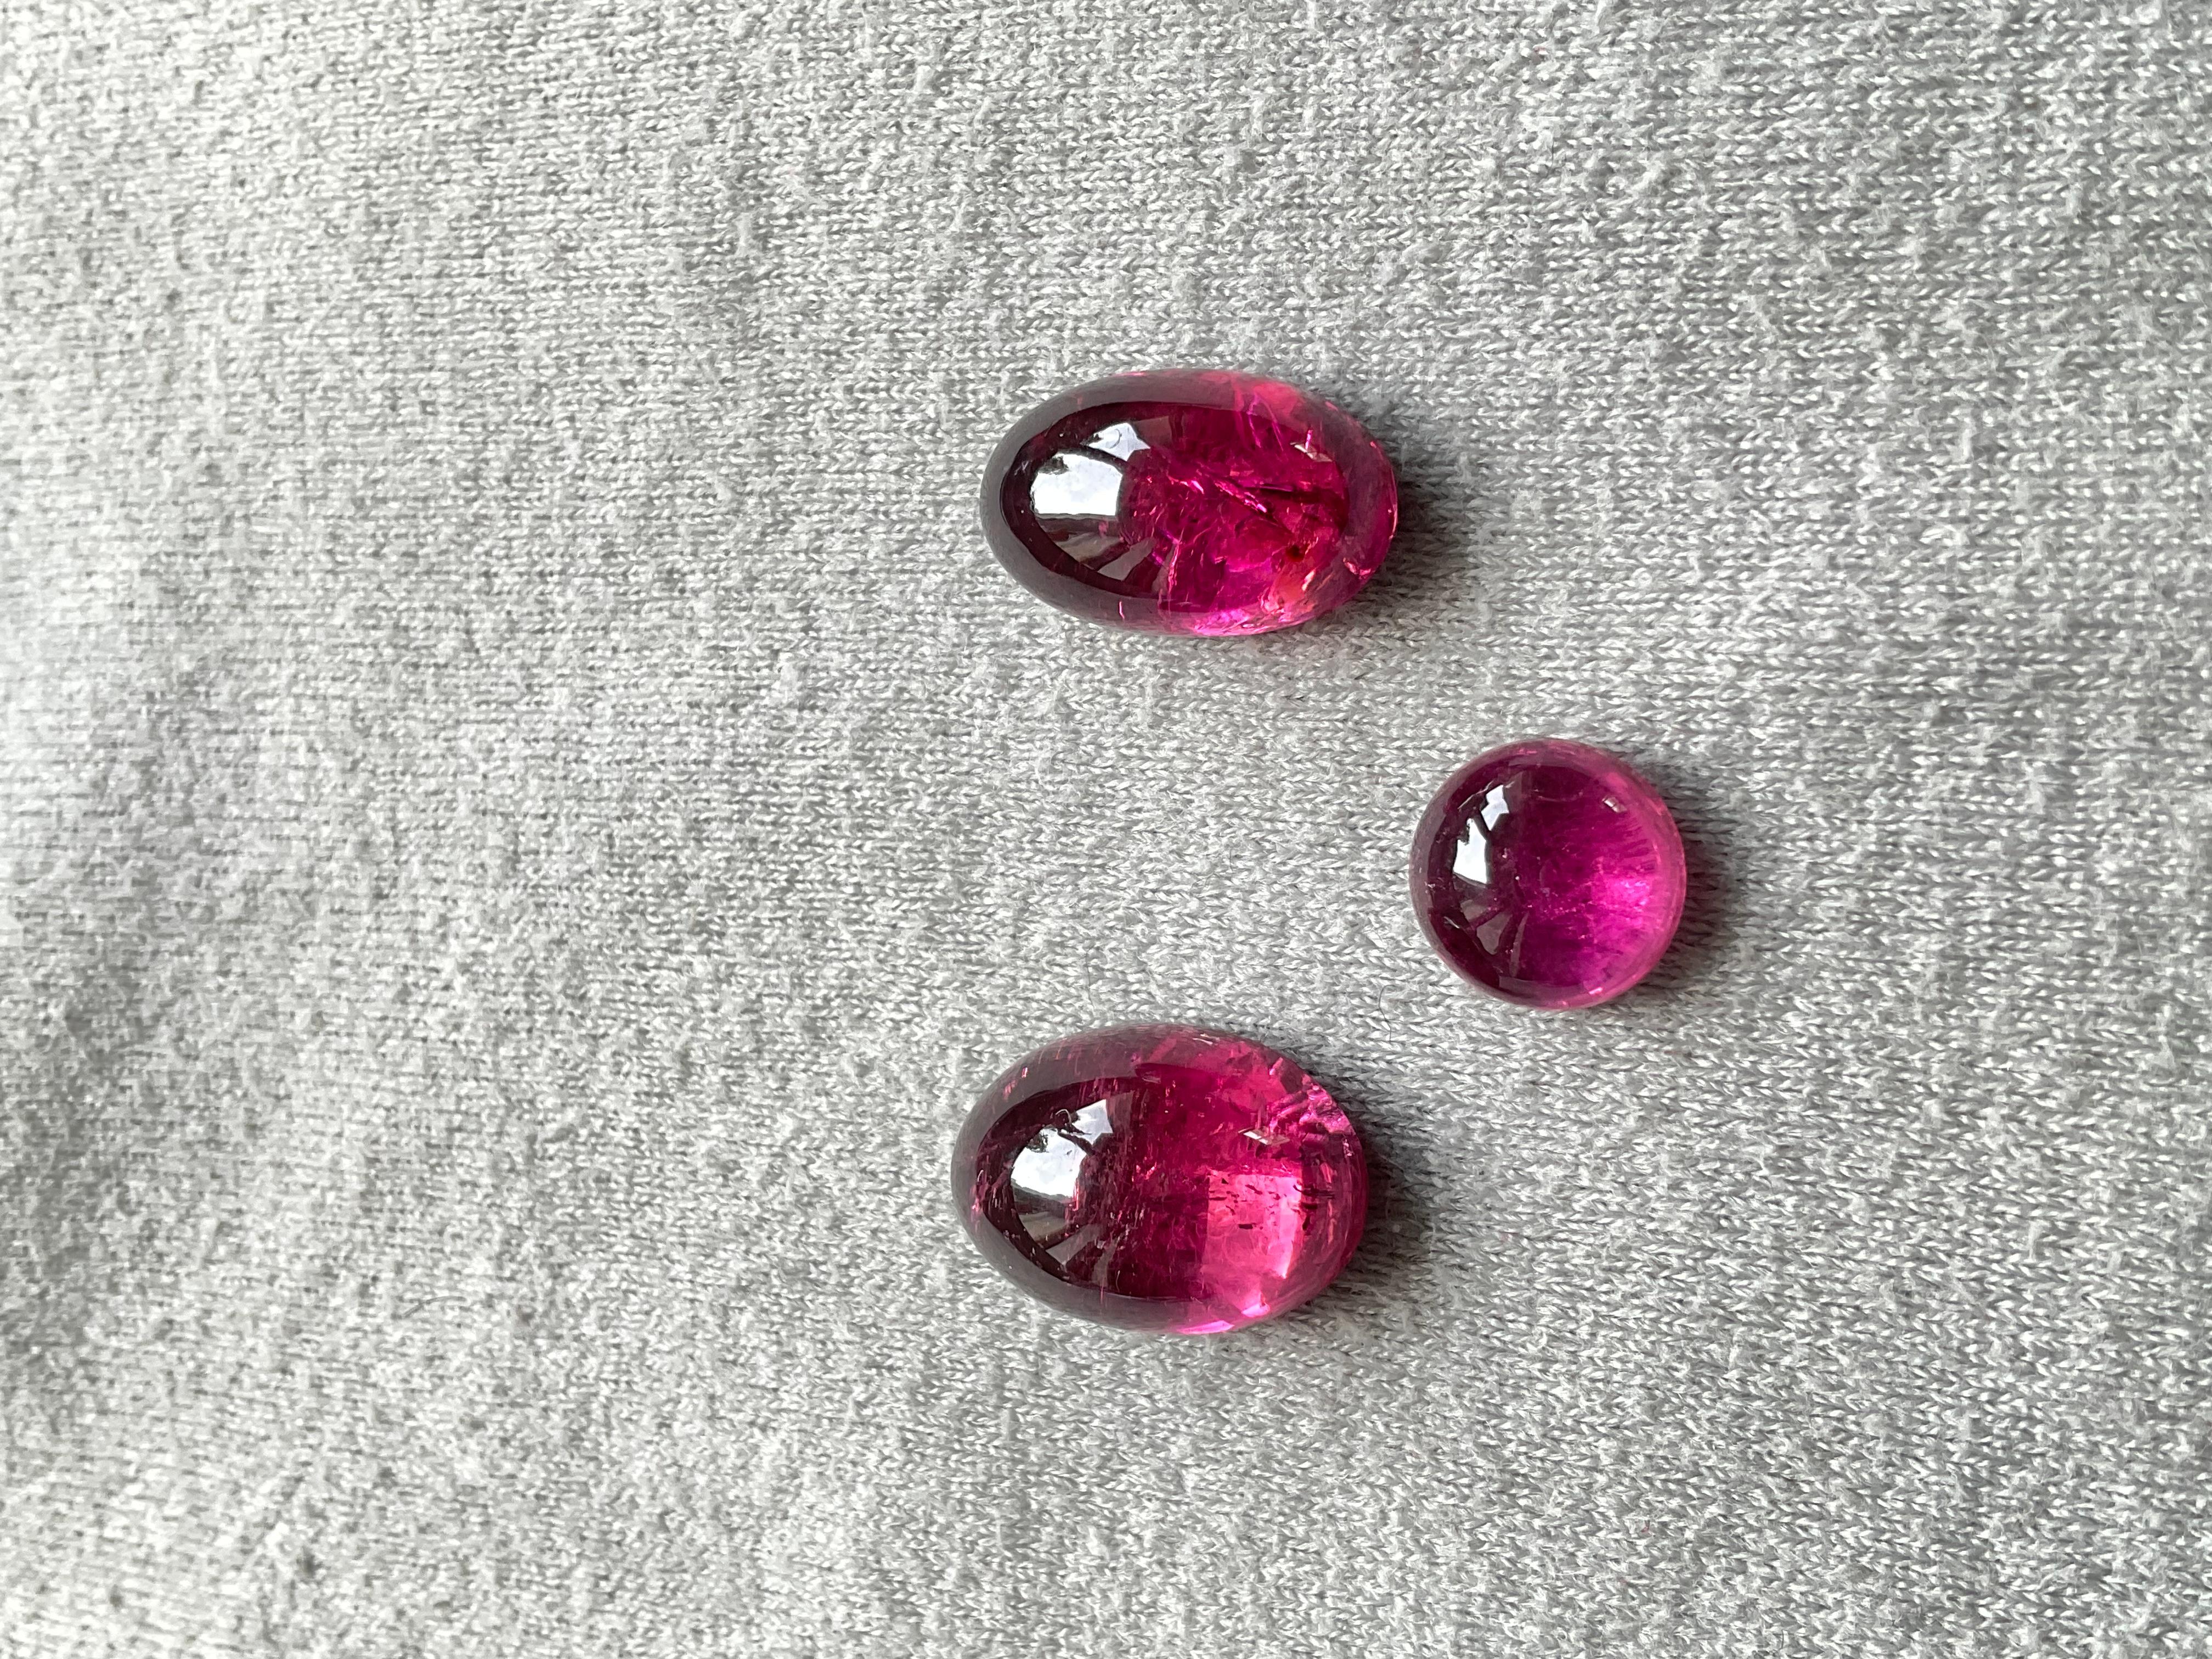 Women's or Men's 25.21 Carats Top Quality Rubellite Tourmaline Cabochon 3 Pieces Natural Gemstone For Sale